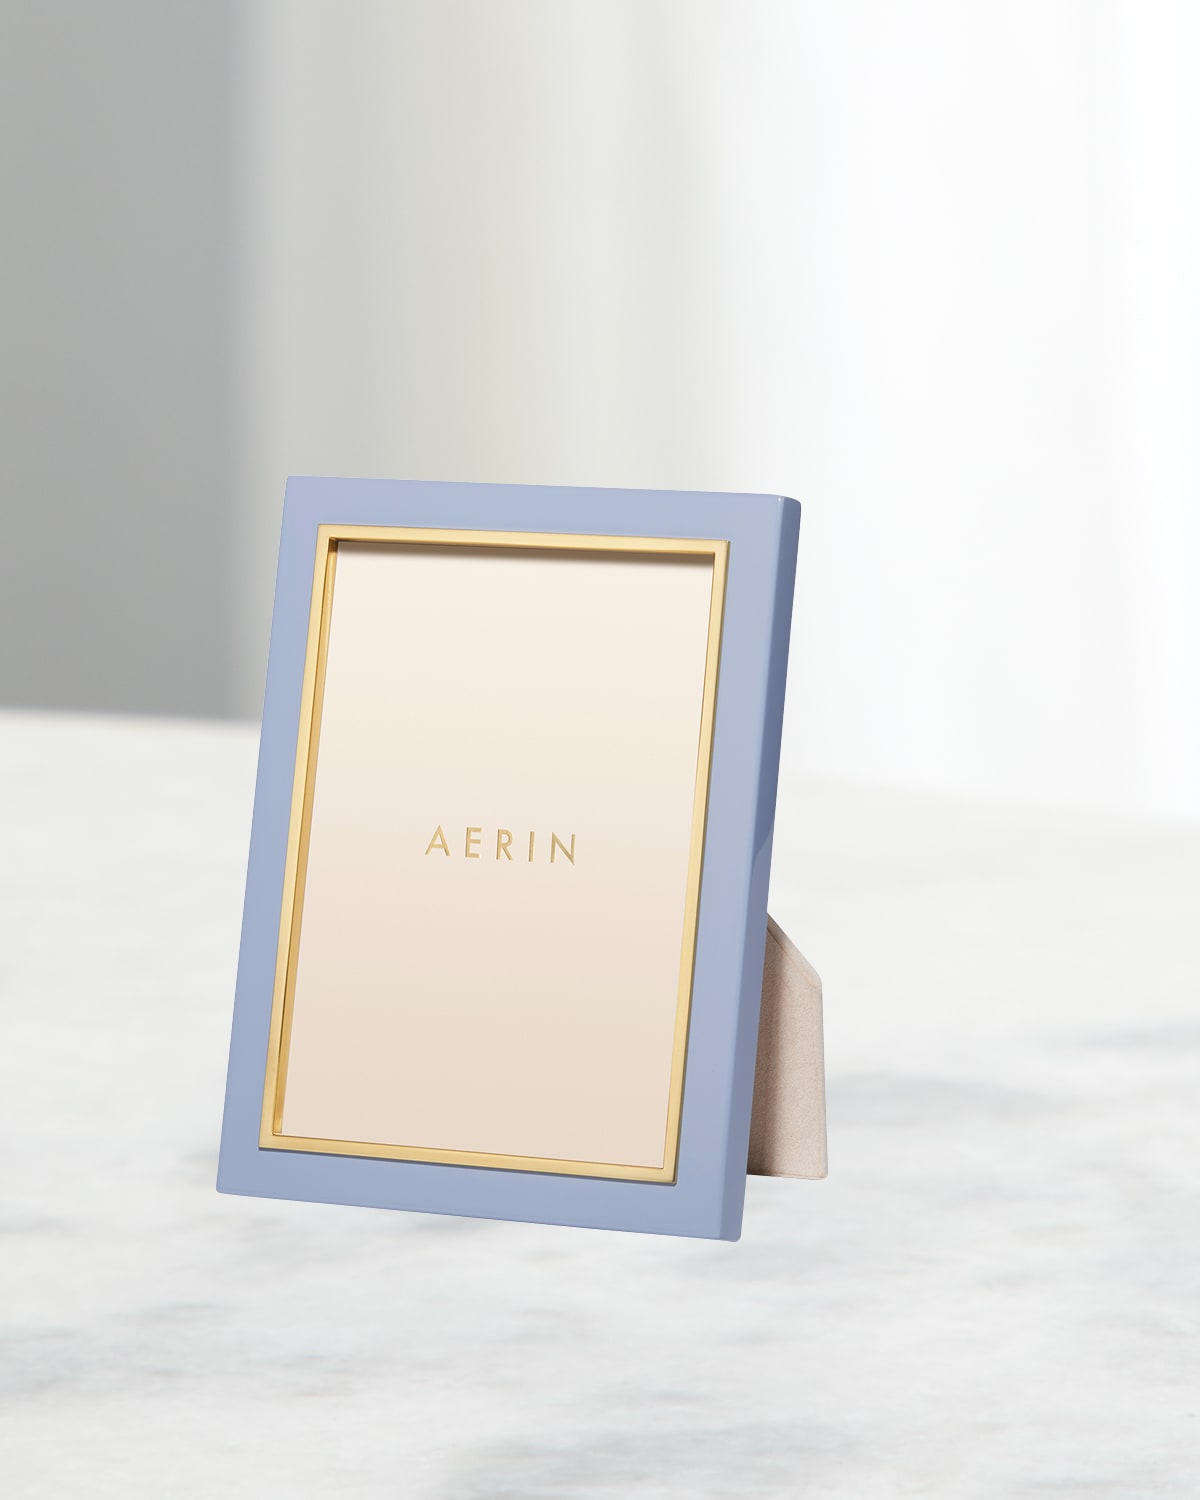 Aerin Varda Lacquer Photo Frame, French Blue - 5x7